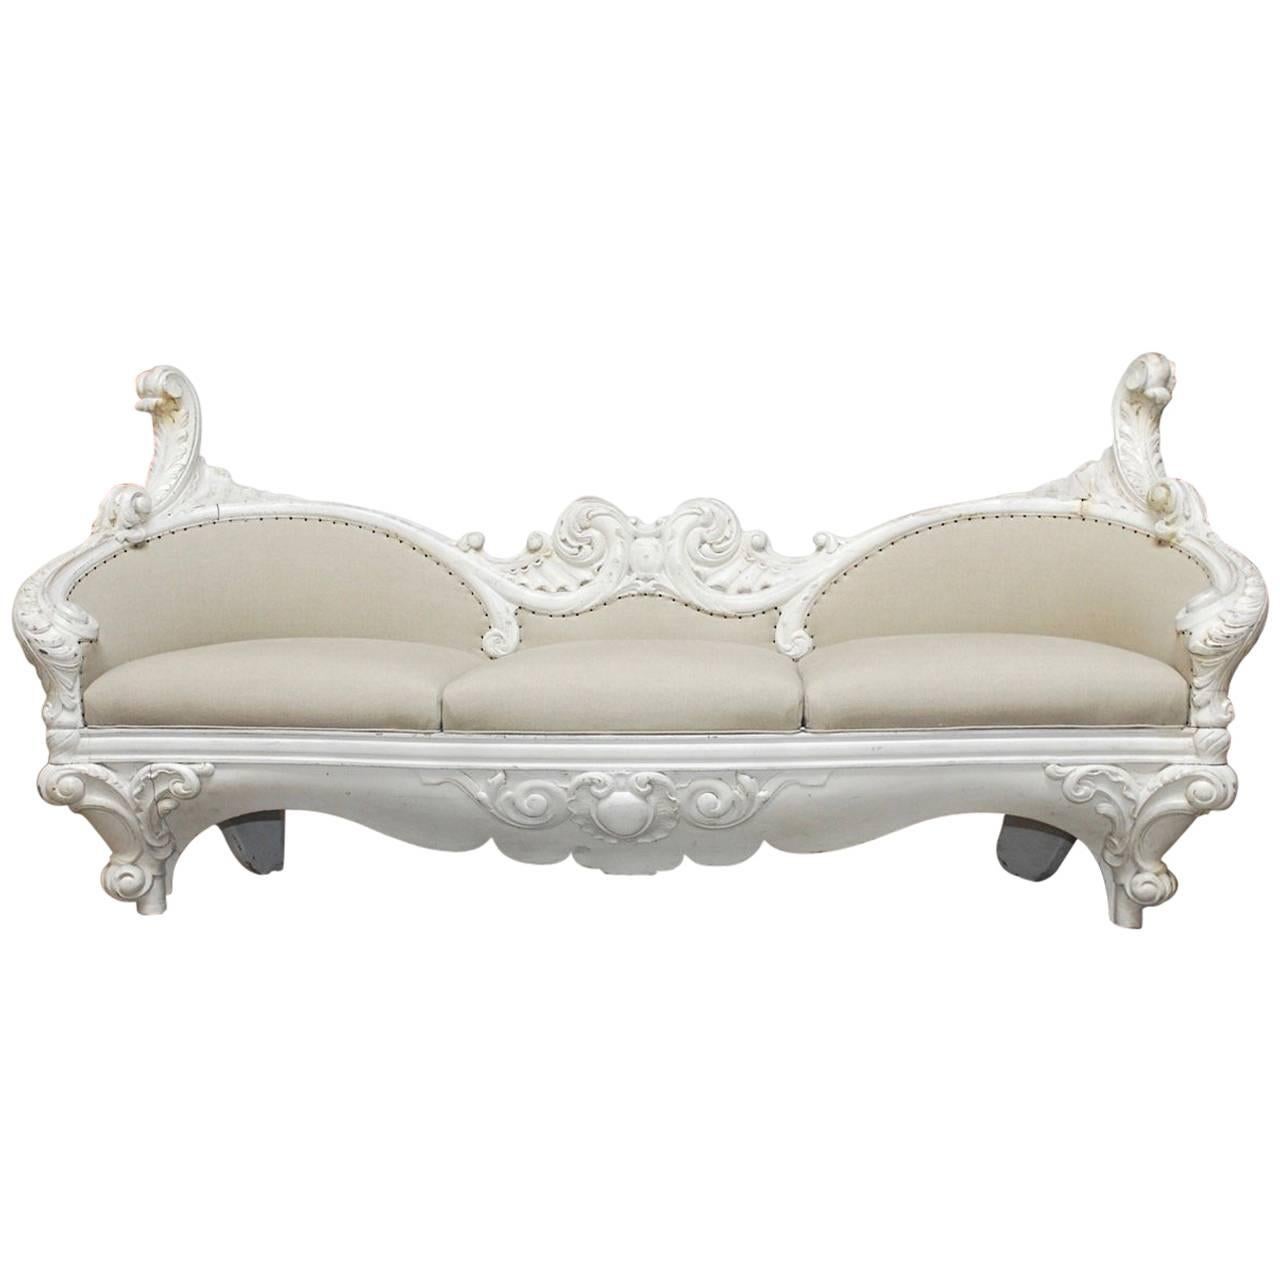 18th Century French Rococo Painted Sofa